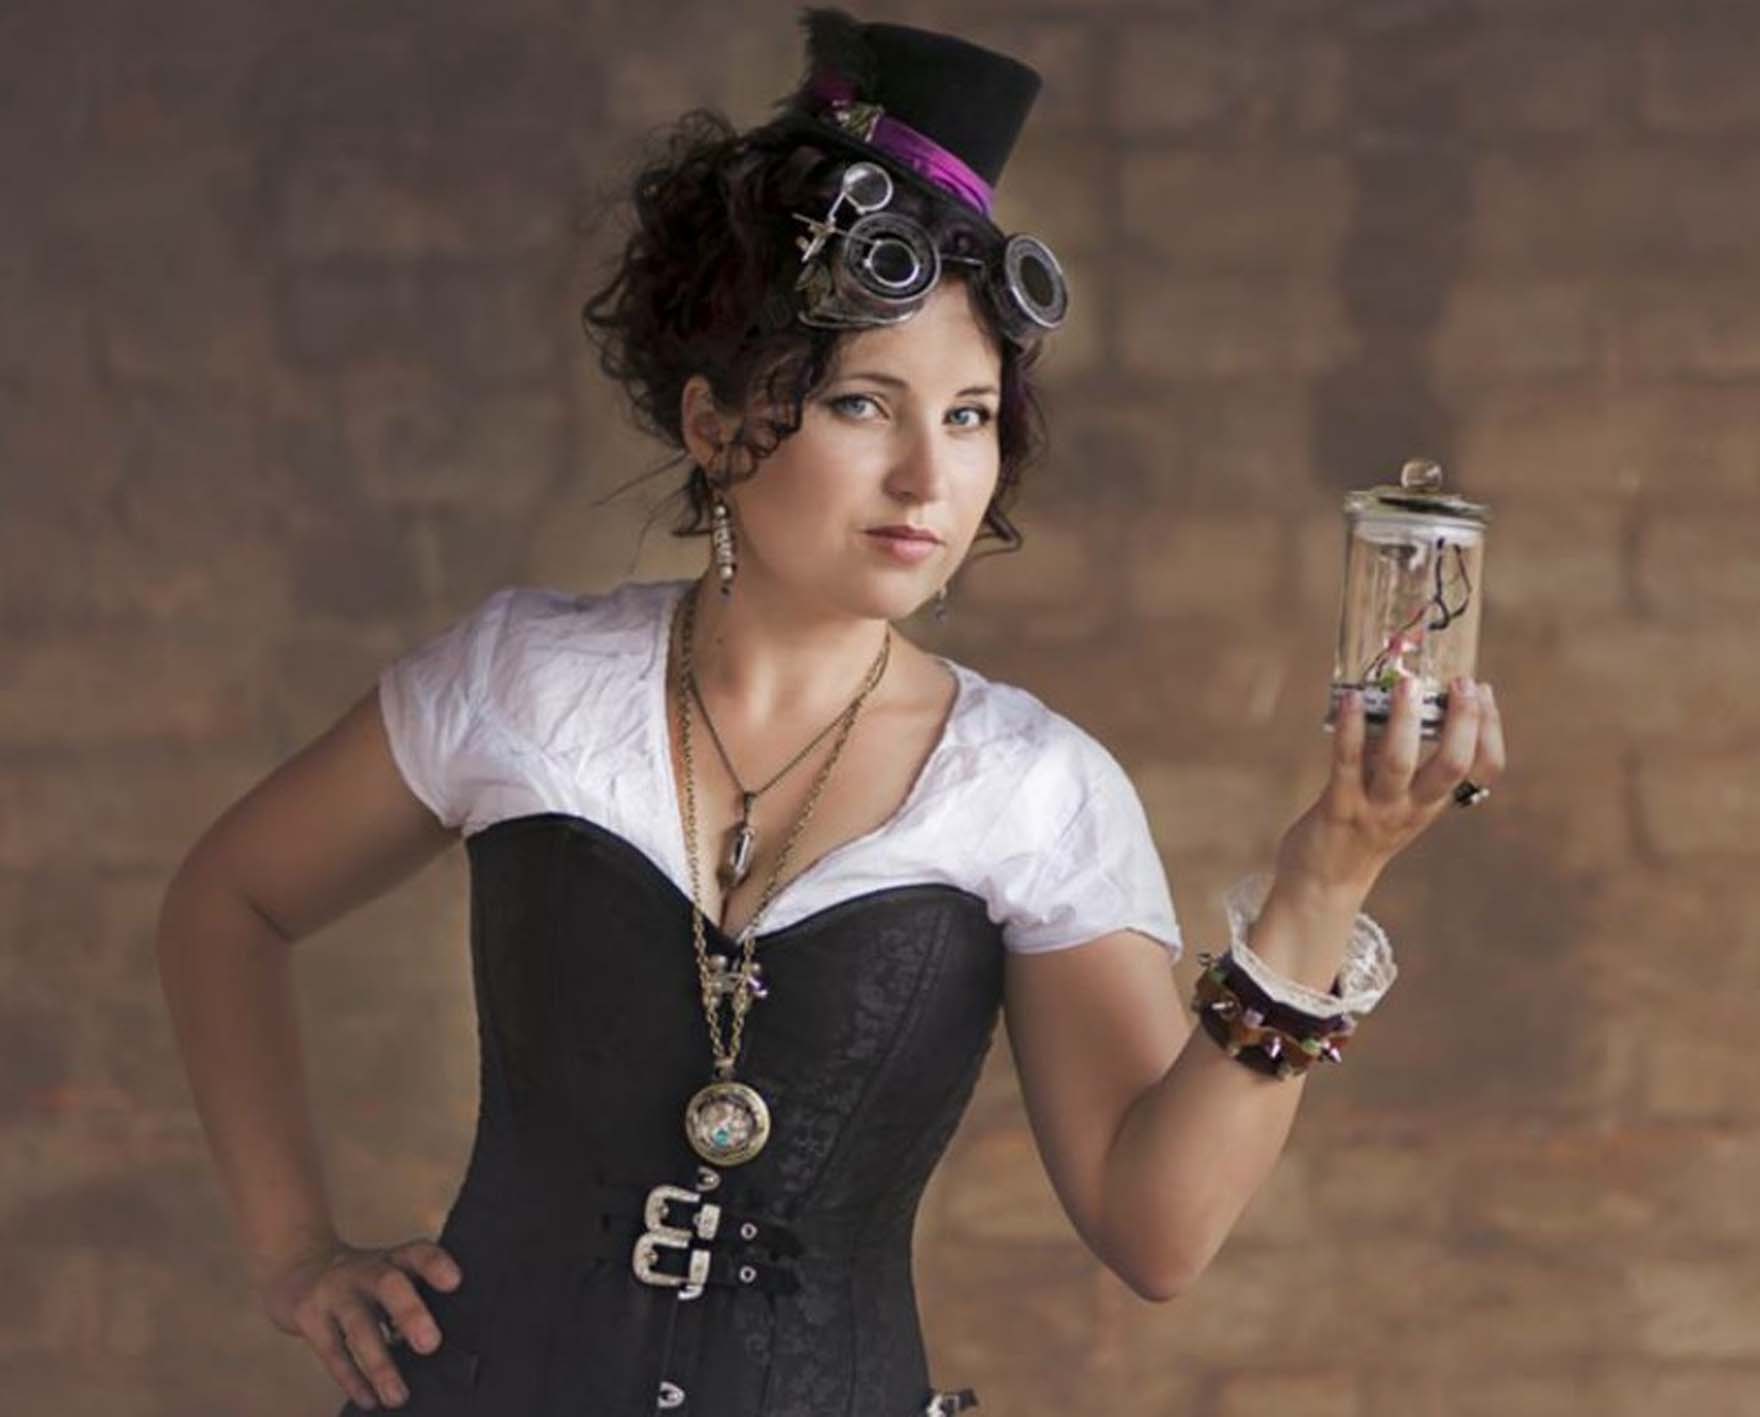 Anita Baills is teaching how to make steampunk jewellery for Galvanized